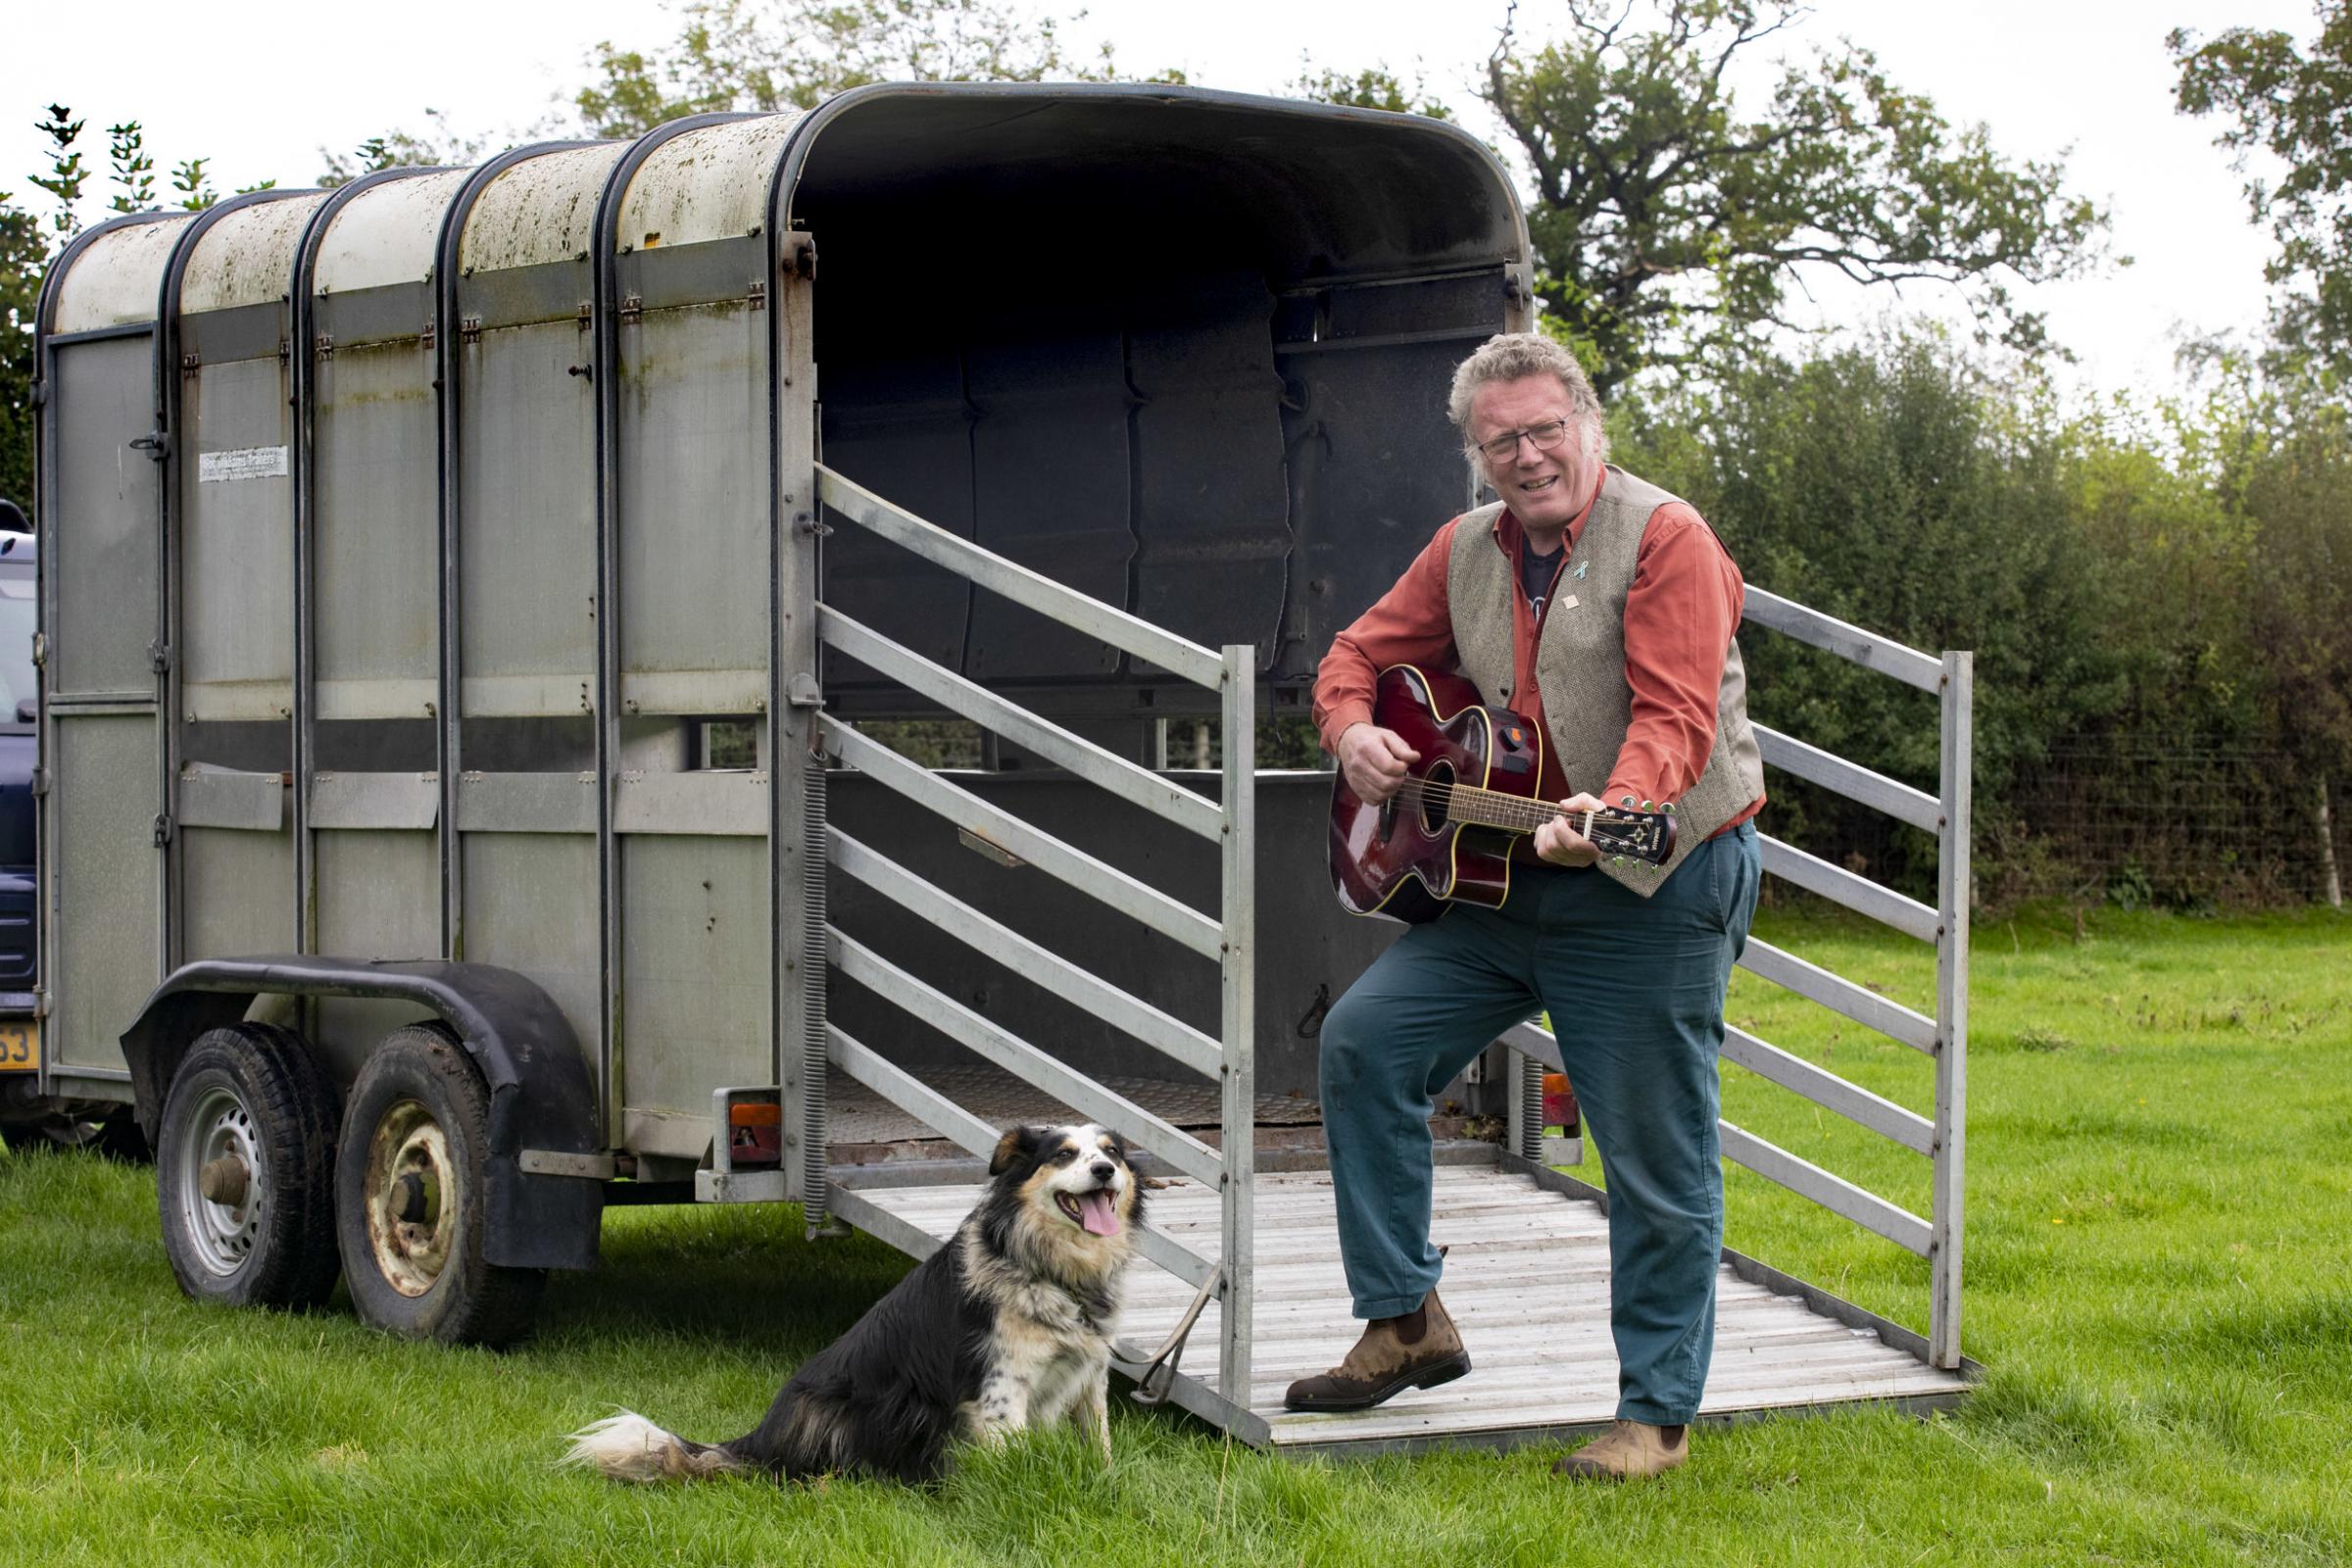 John Hughes the Singing farmer sing a song about Ifor Williams Trailers, Pictured The Singing Farmer John Hughes and his dog Poppy. Picture Mandy Jones.